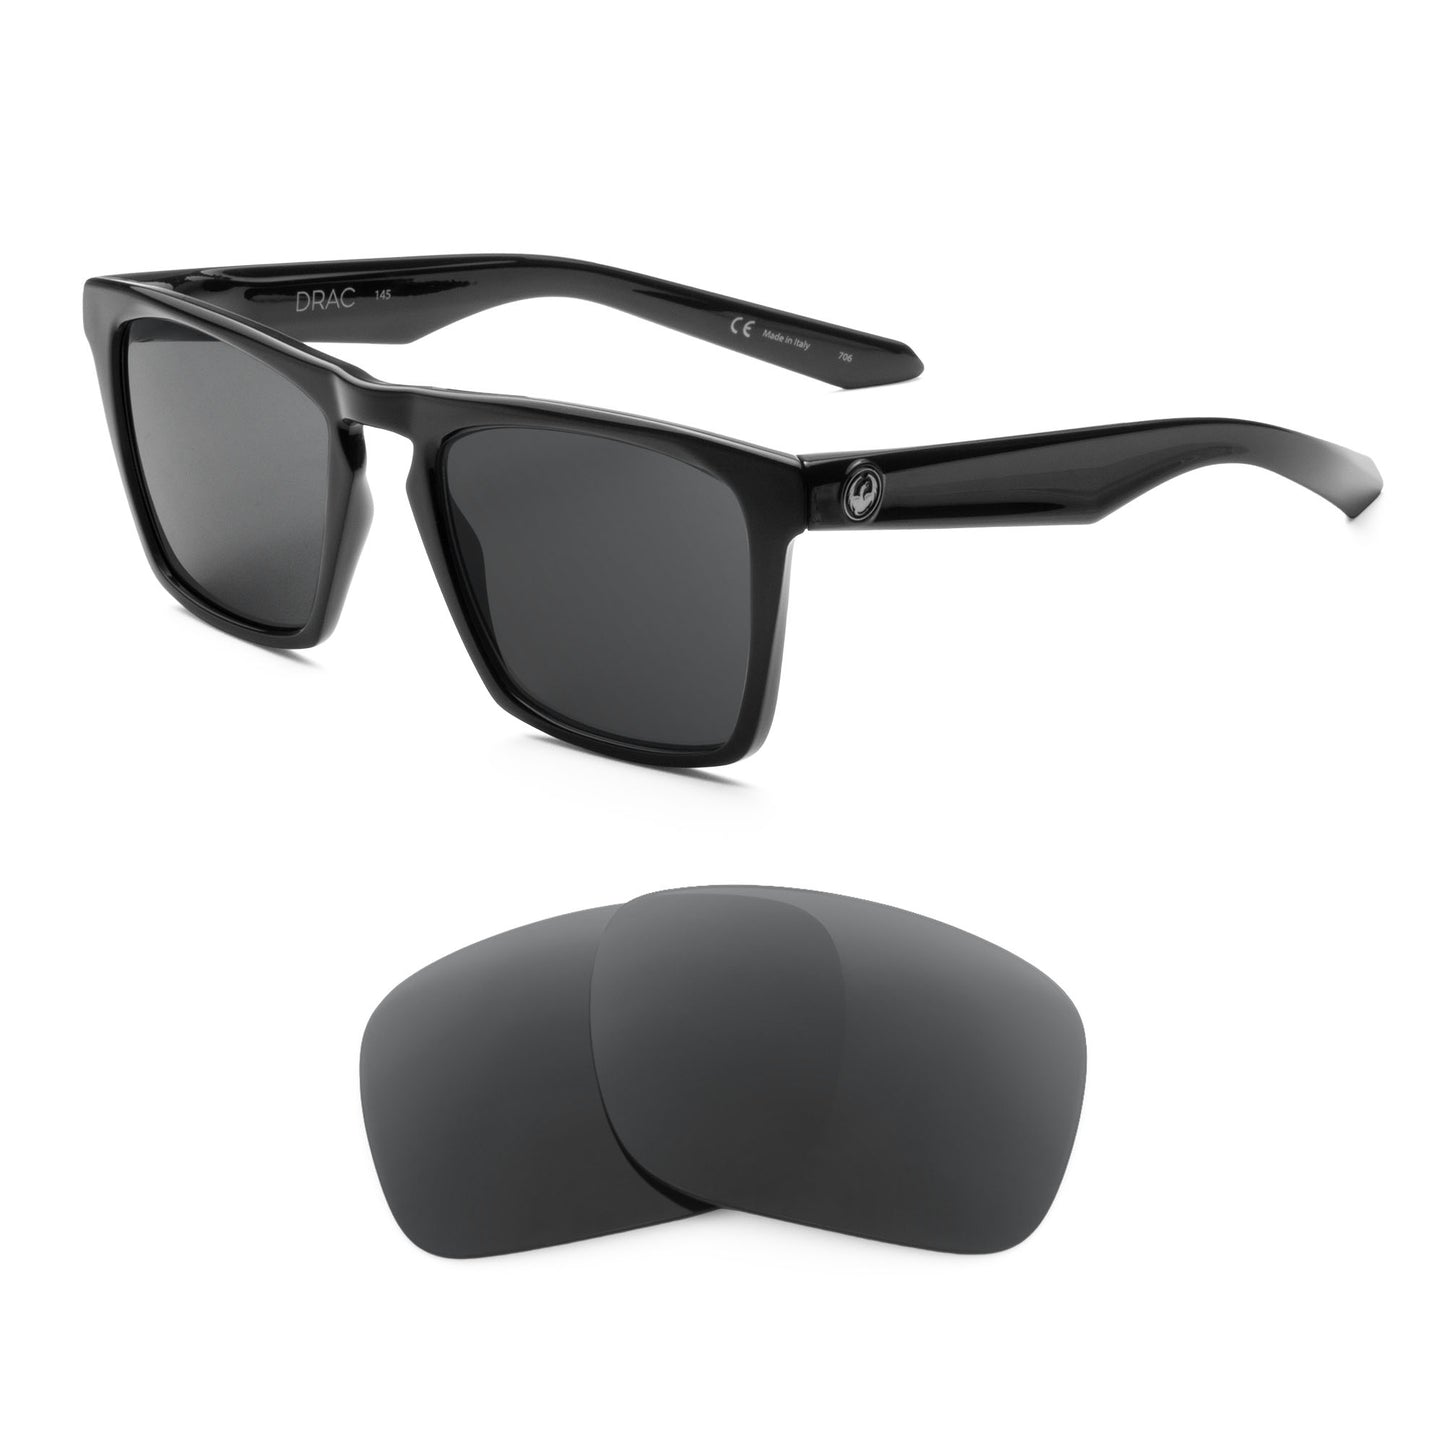 Dragon Drac sunglasses with replacement lenses